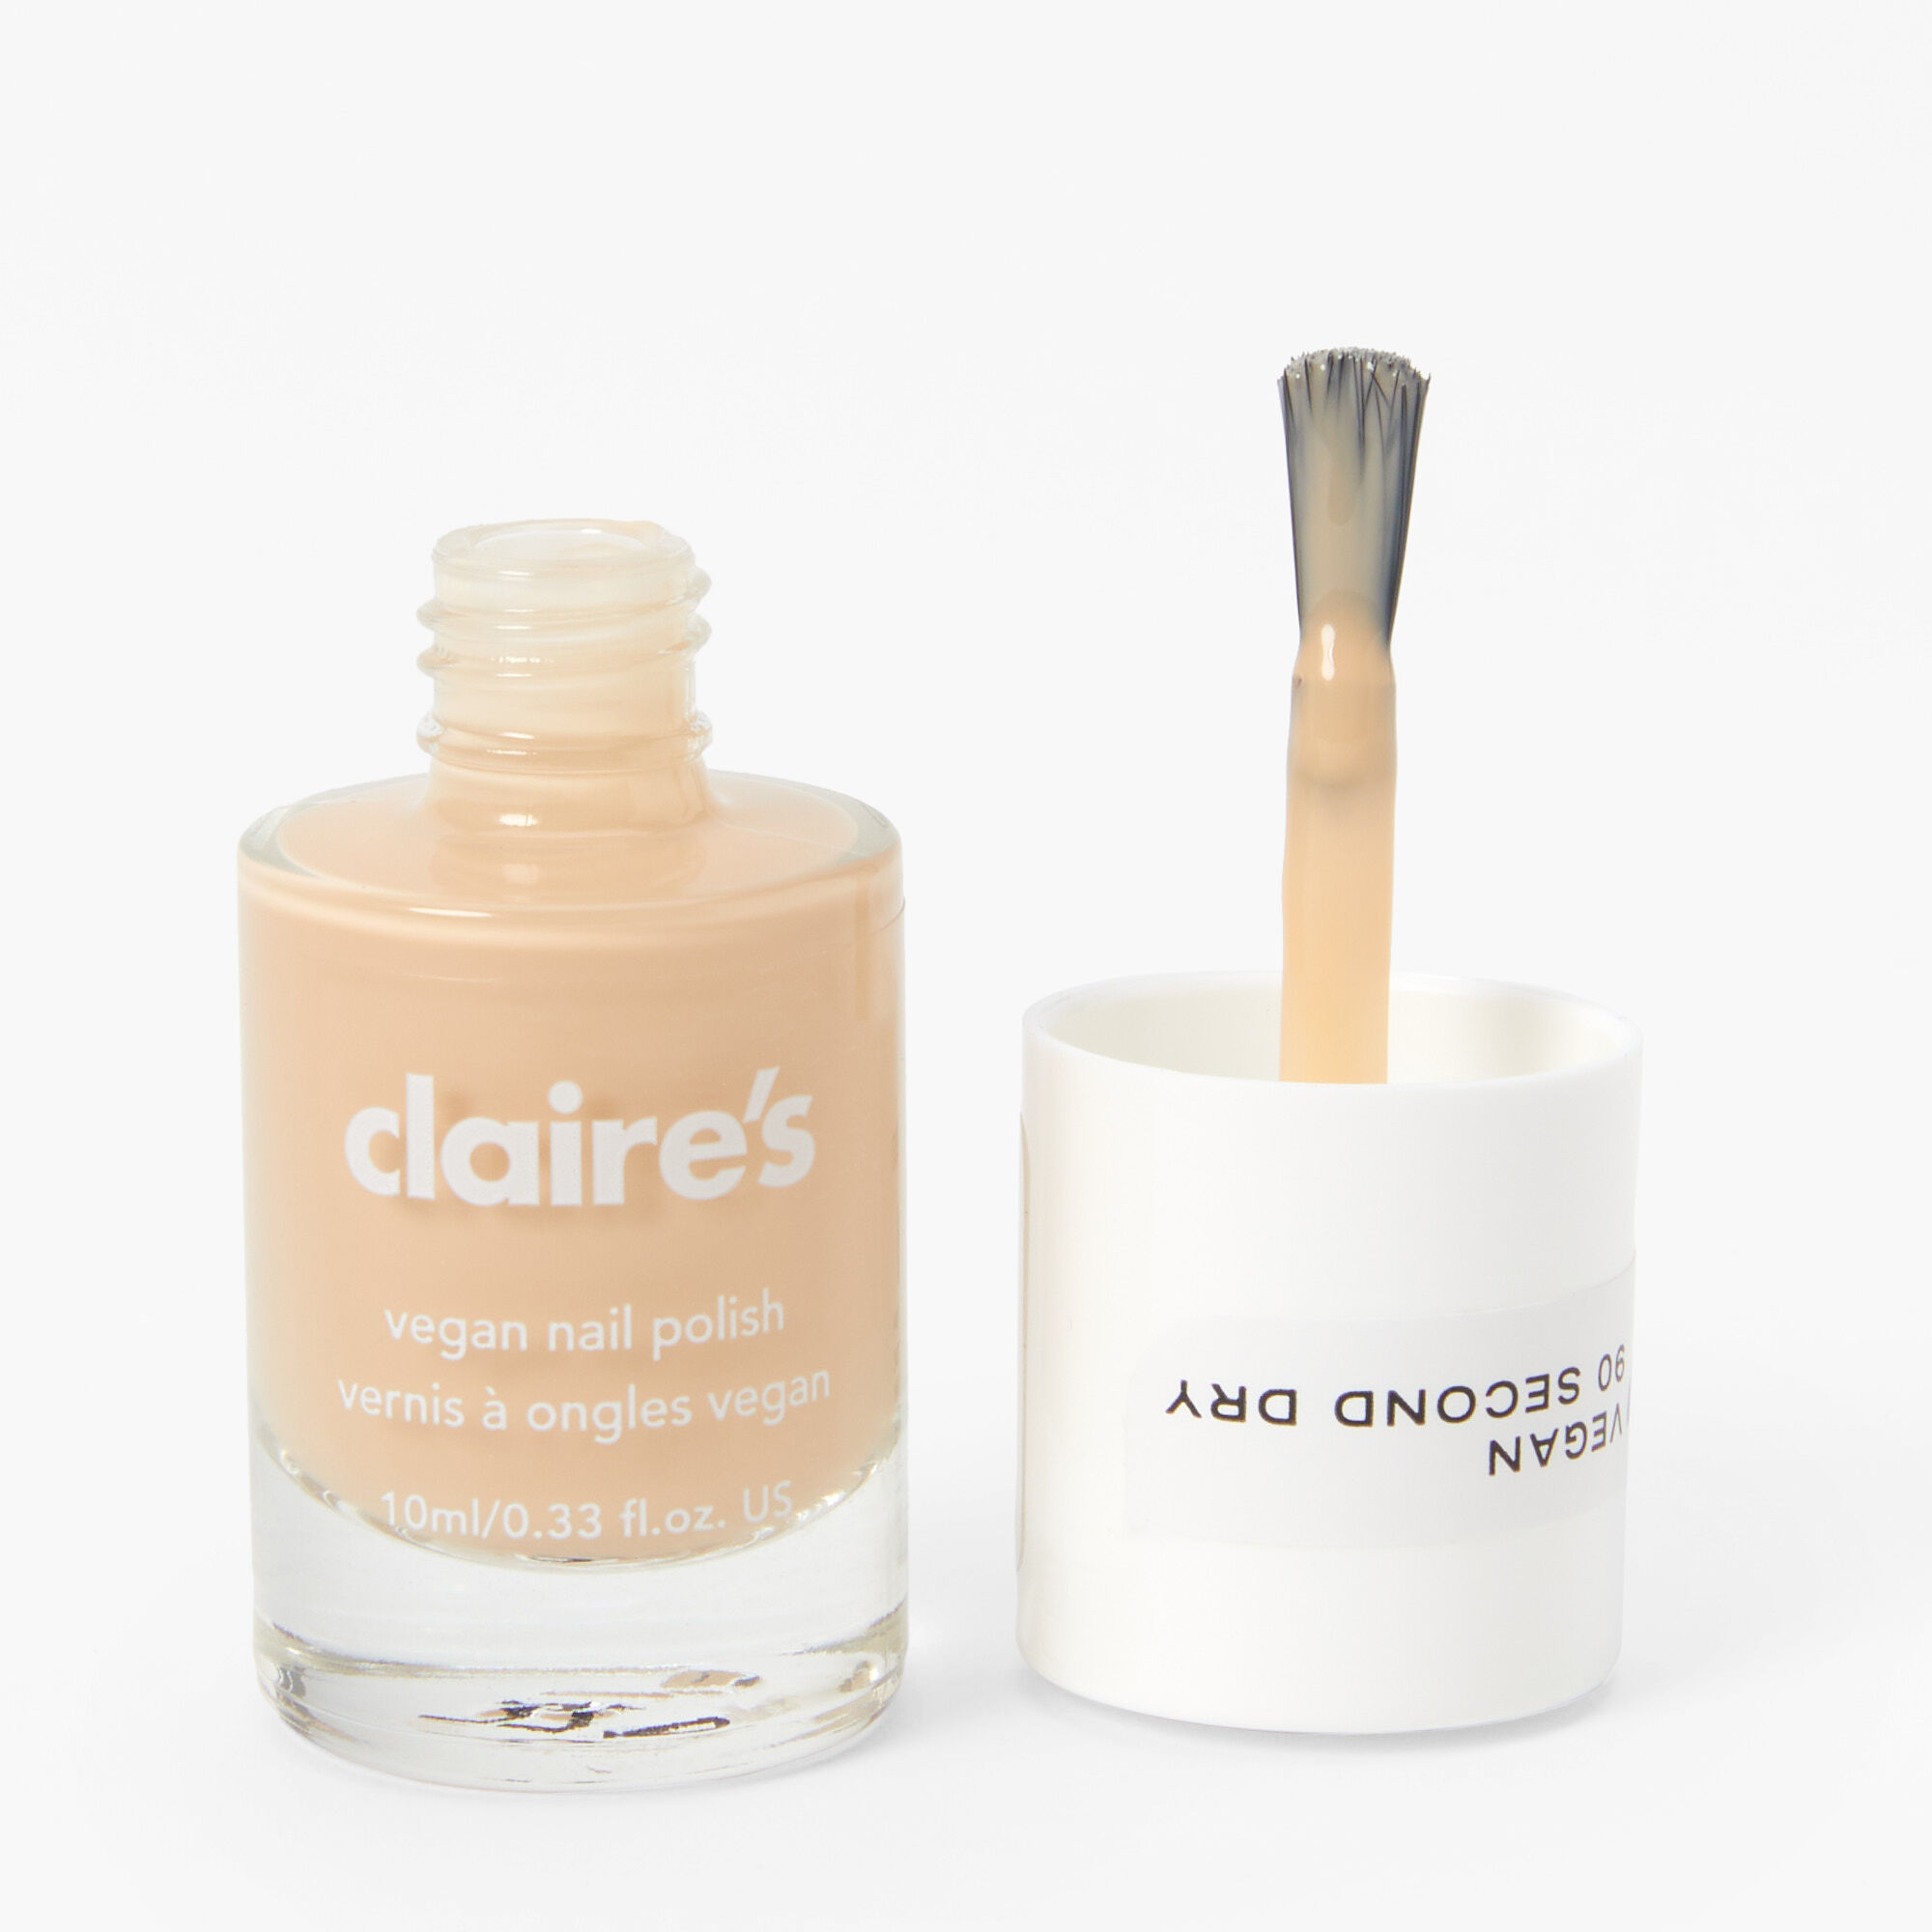 View Claires Vegan Nail Polish Nude information